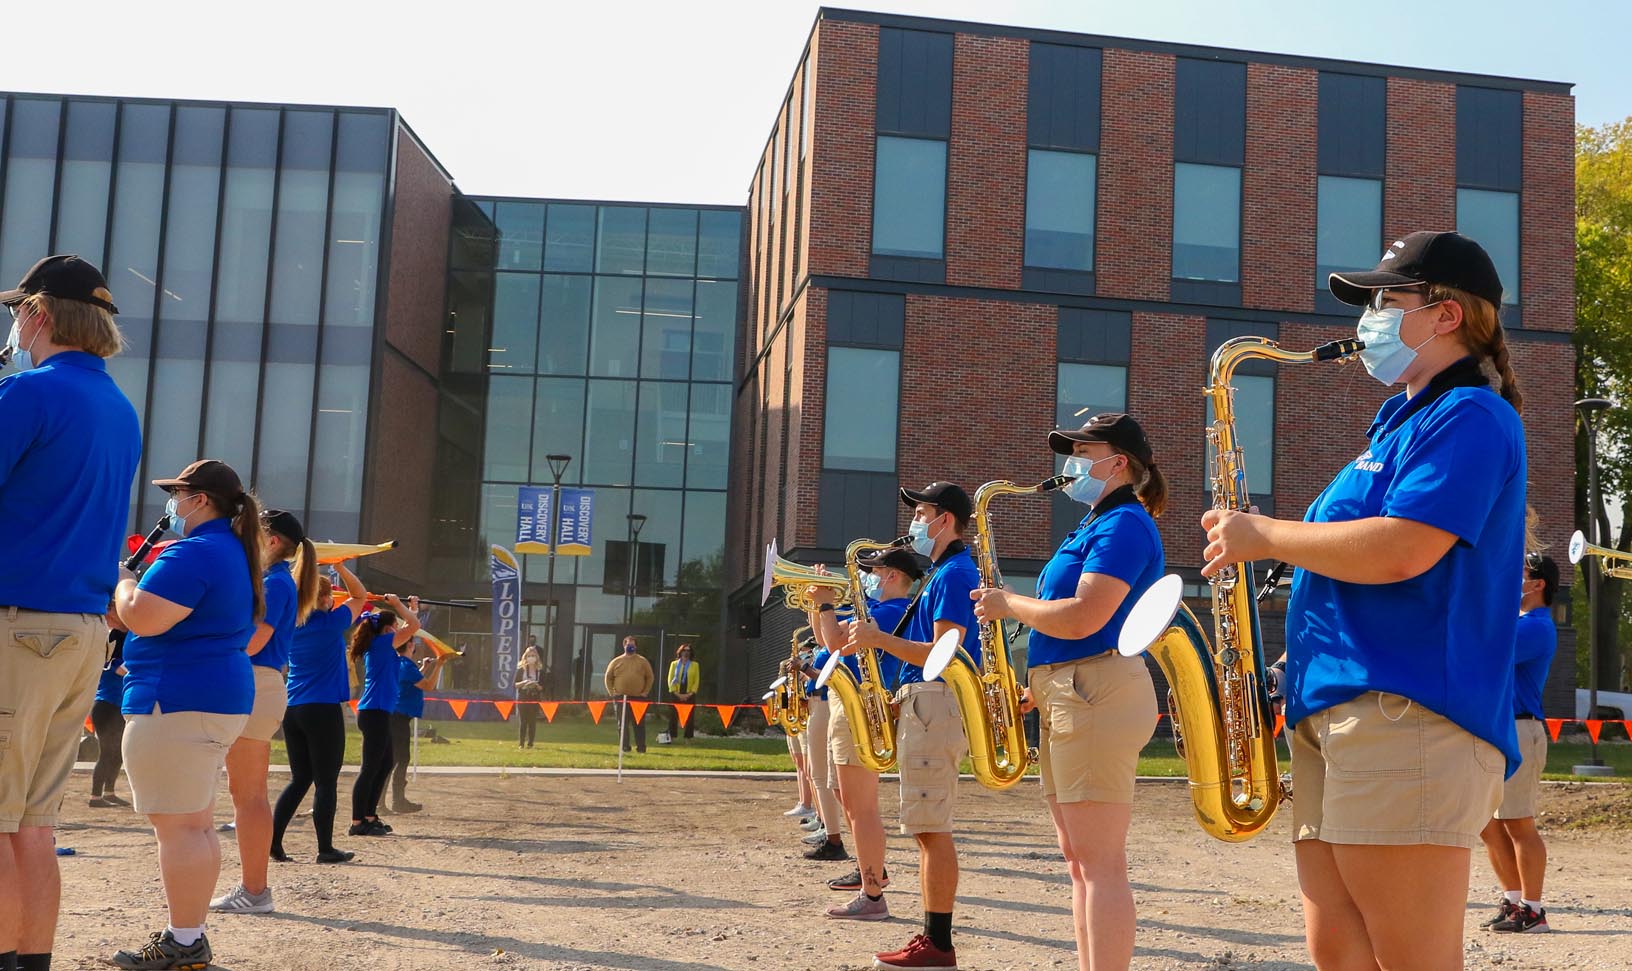 UNK’s Pride of the Plains Marching Band performs Monday during a ribbon-cutting ceremony celebrating the grand opening of Discovery Hall. The event kicked off homecoming week on campus.